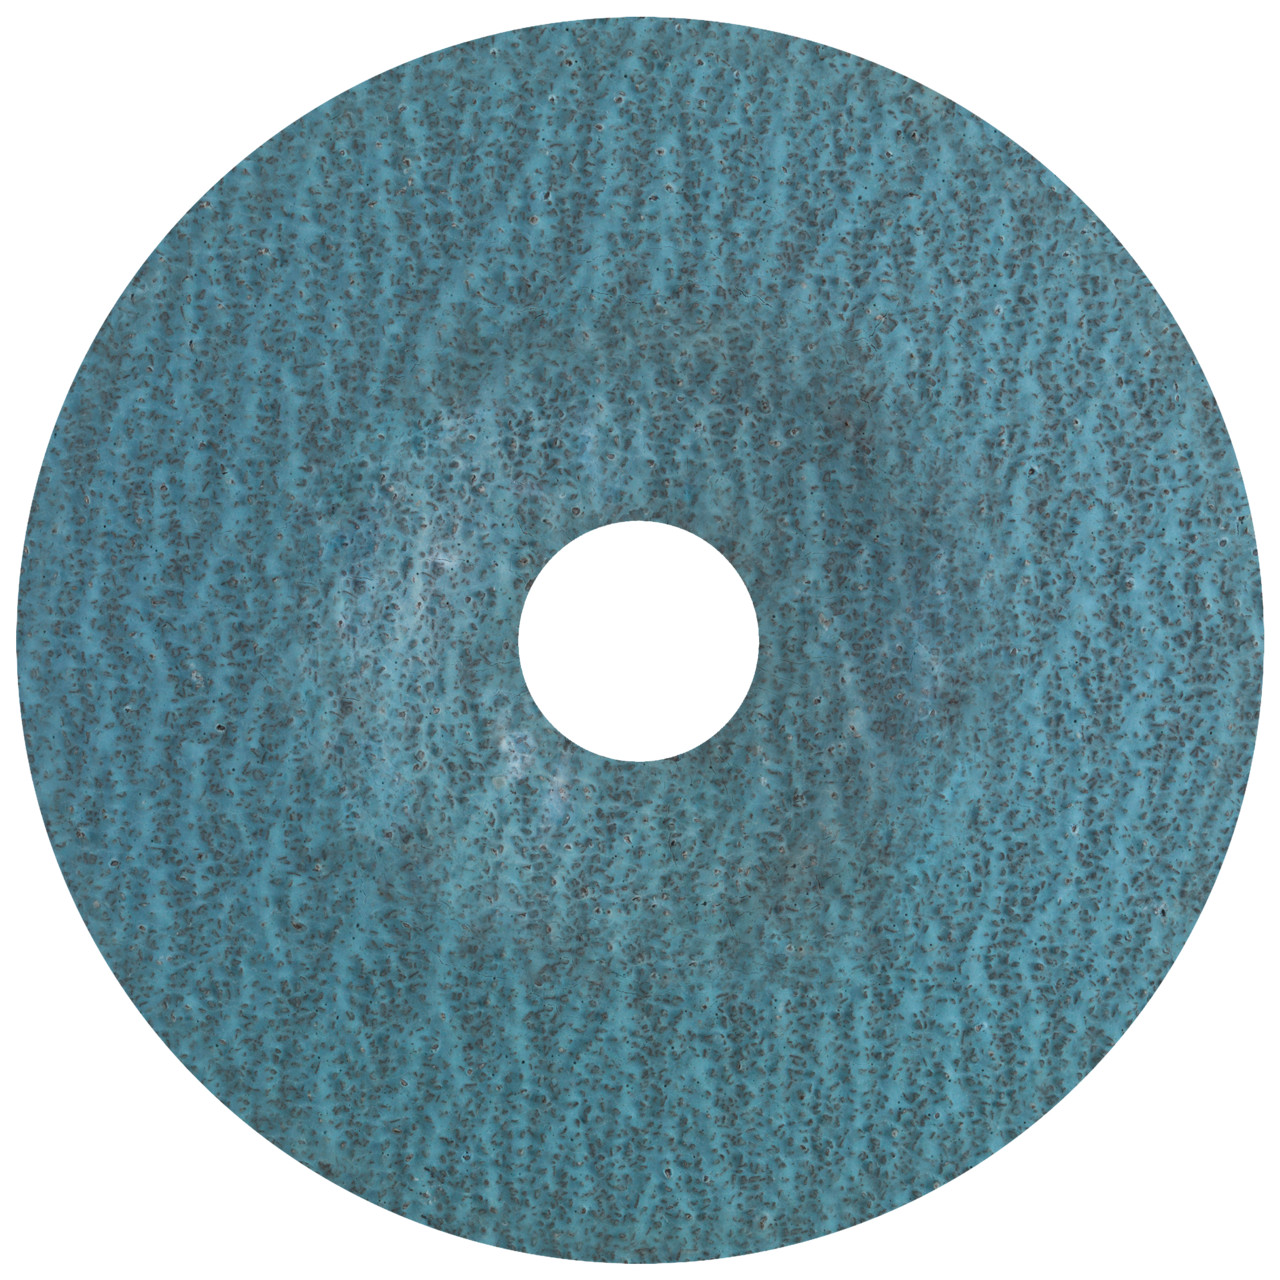 TYROLIT ZA-P48 N NATURAL FIBER DISC DxH 125x22 For steel and stainless steel, P60, form: DISC, Art. 205058